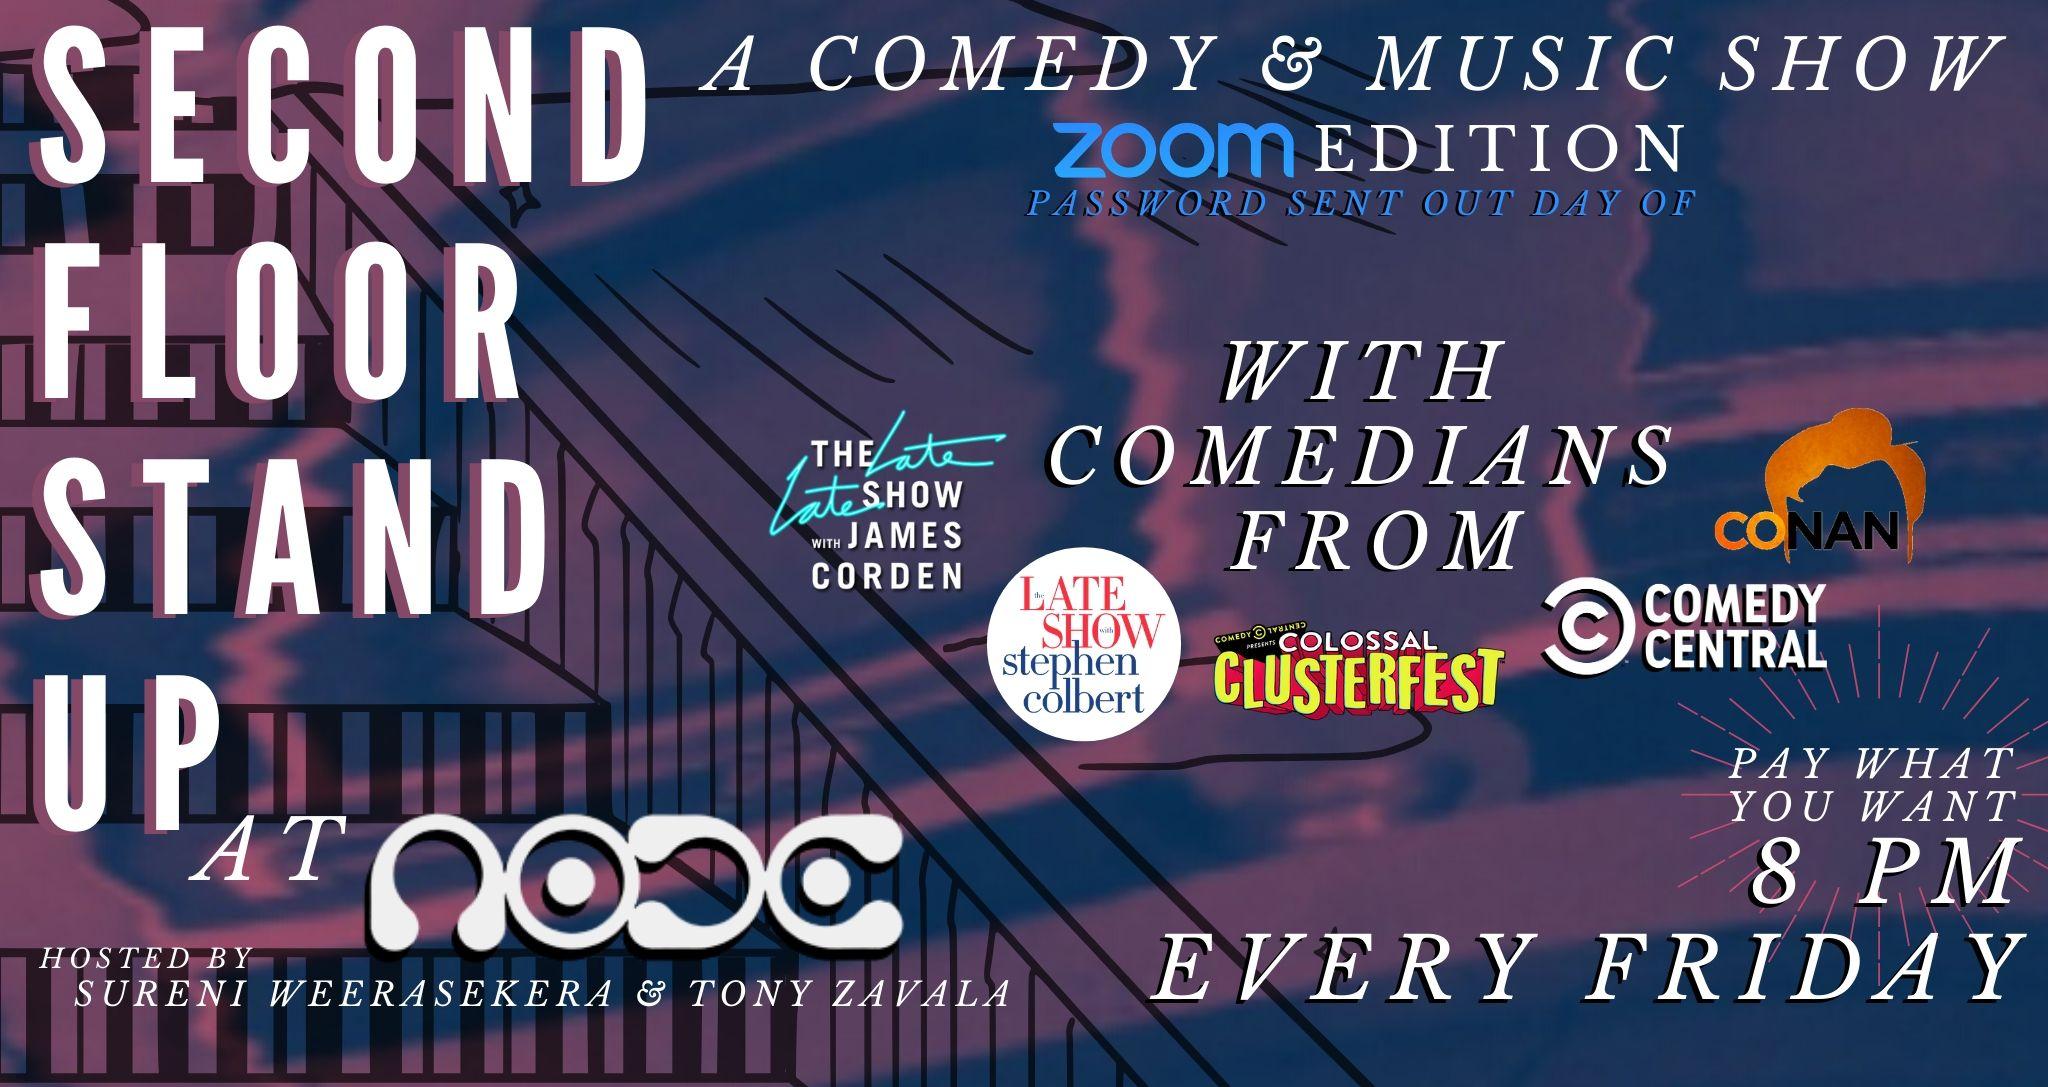 Second Floor Stand Up: A Comedy & Music Show @ NODE